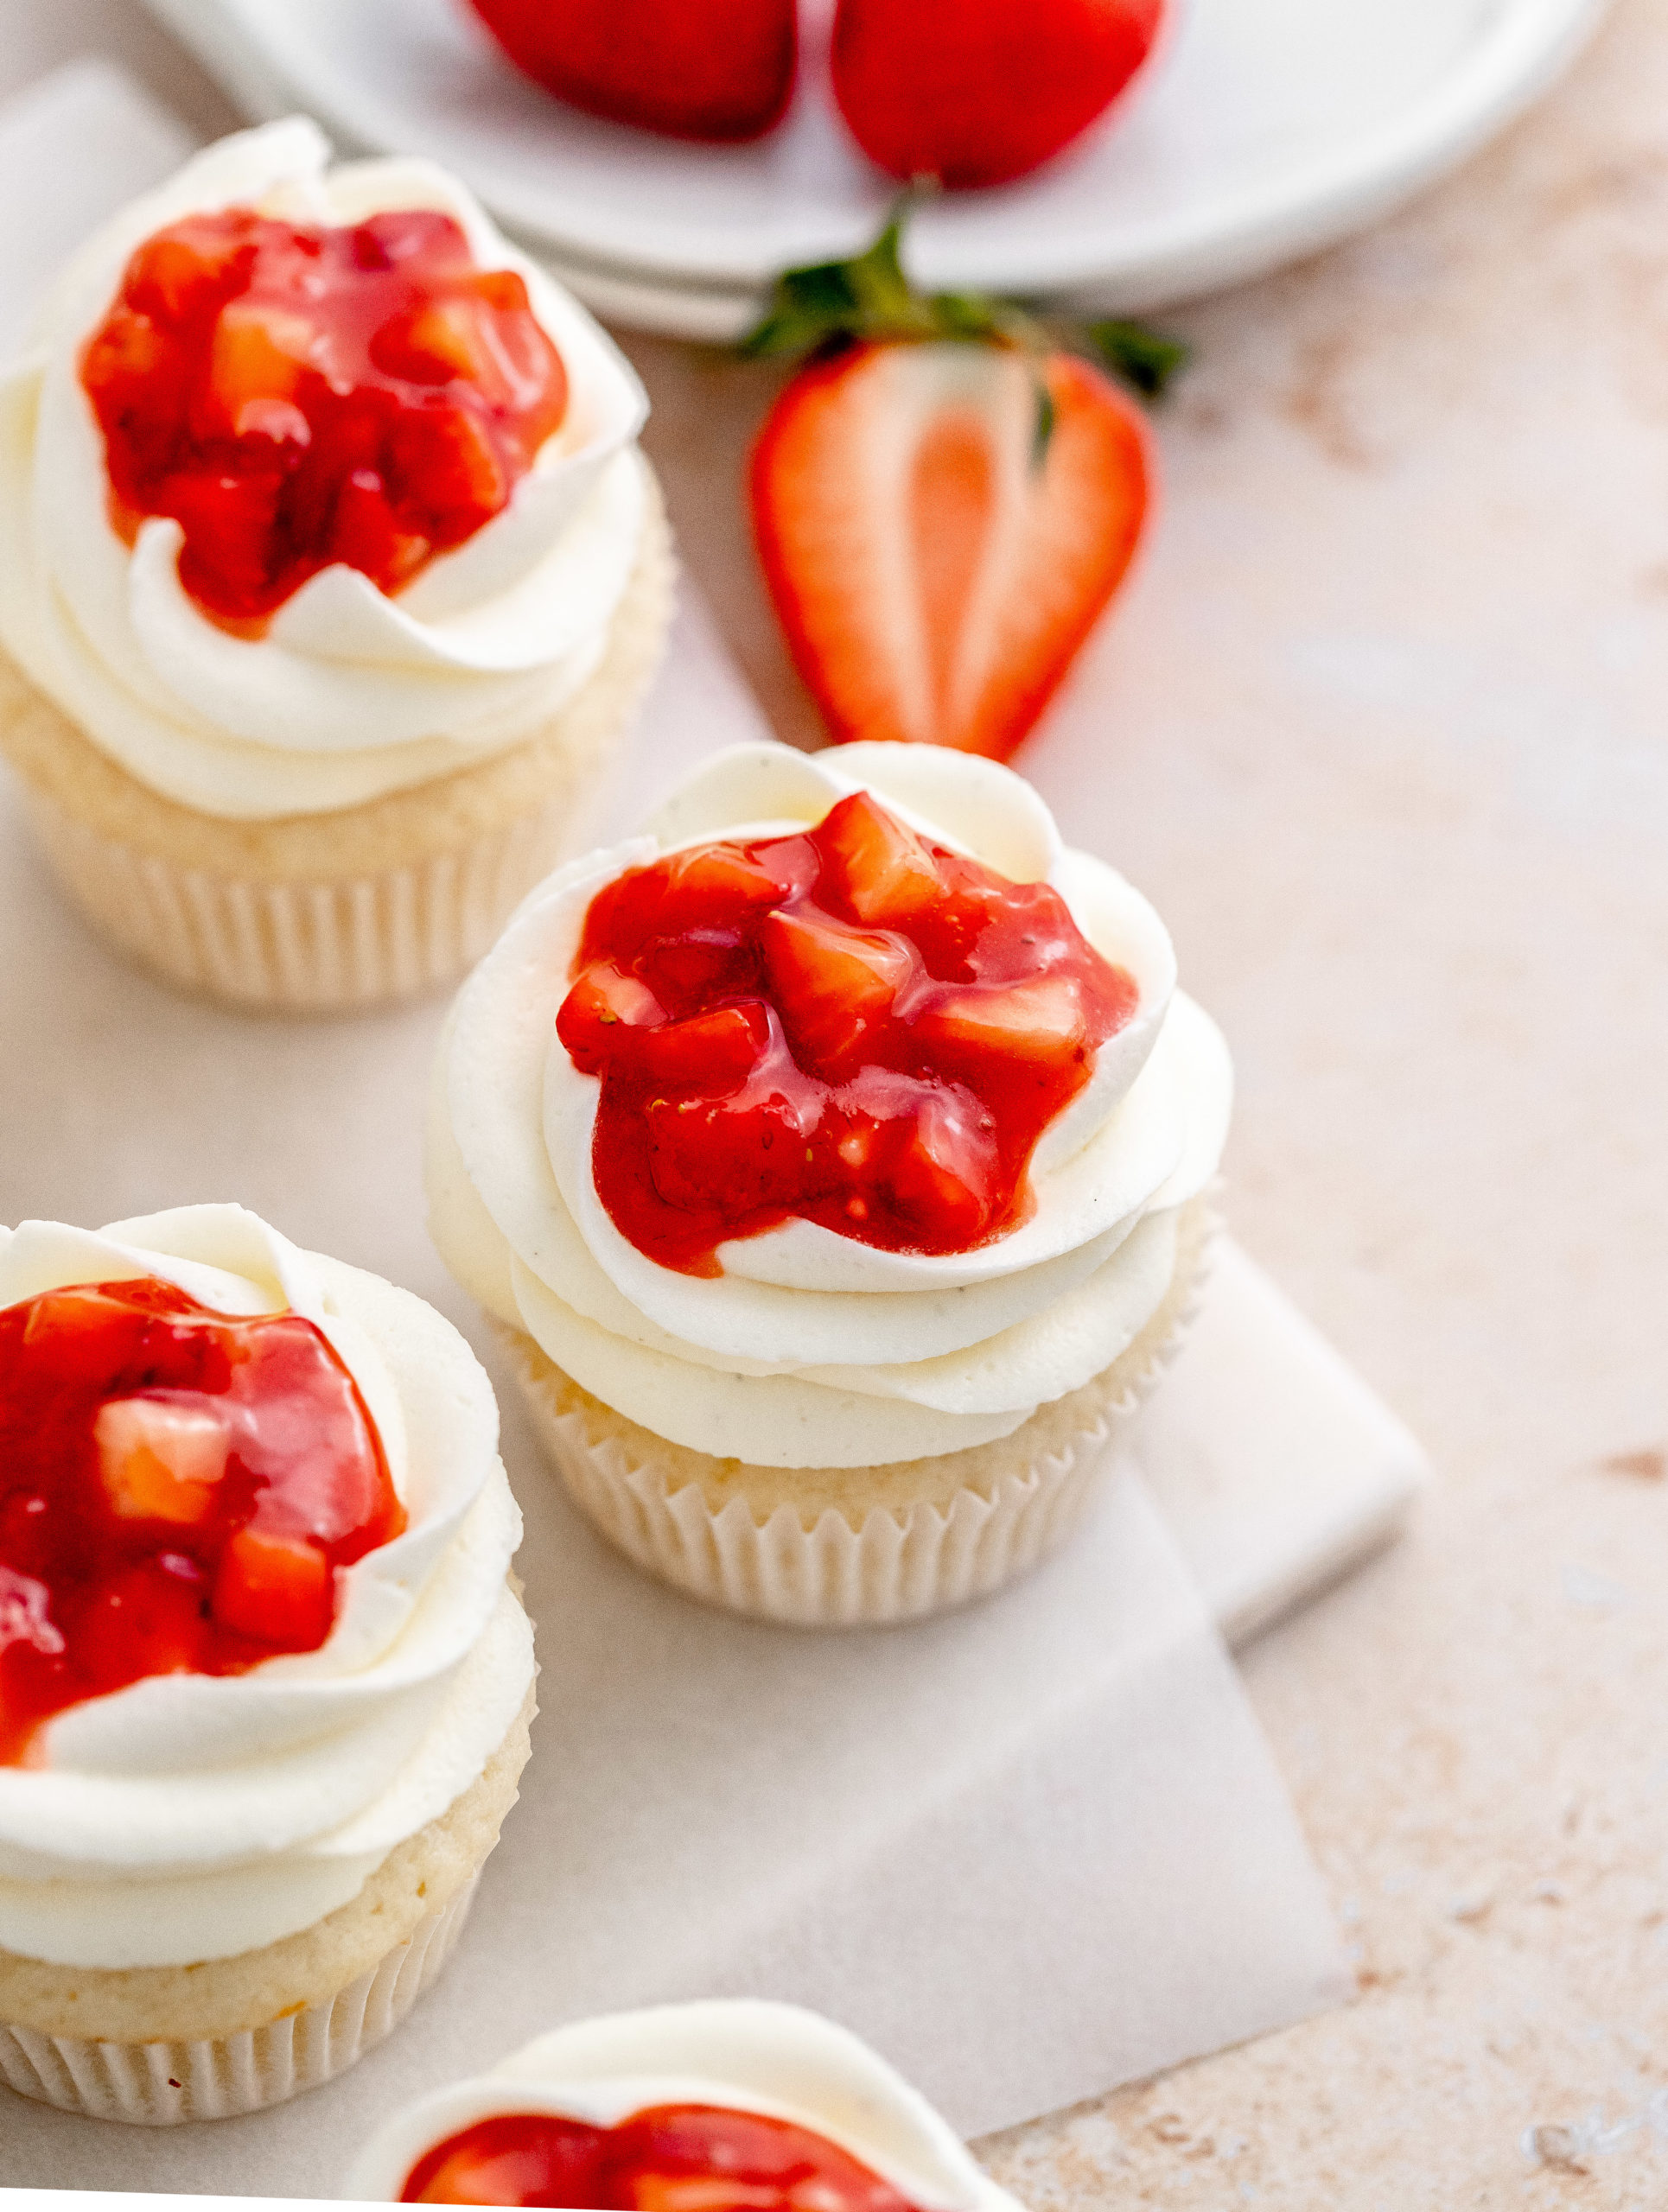 This Super Cheap Baker's Trick Makes Homemade Cupcakes Look So Fancy